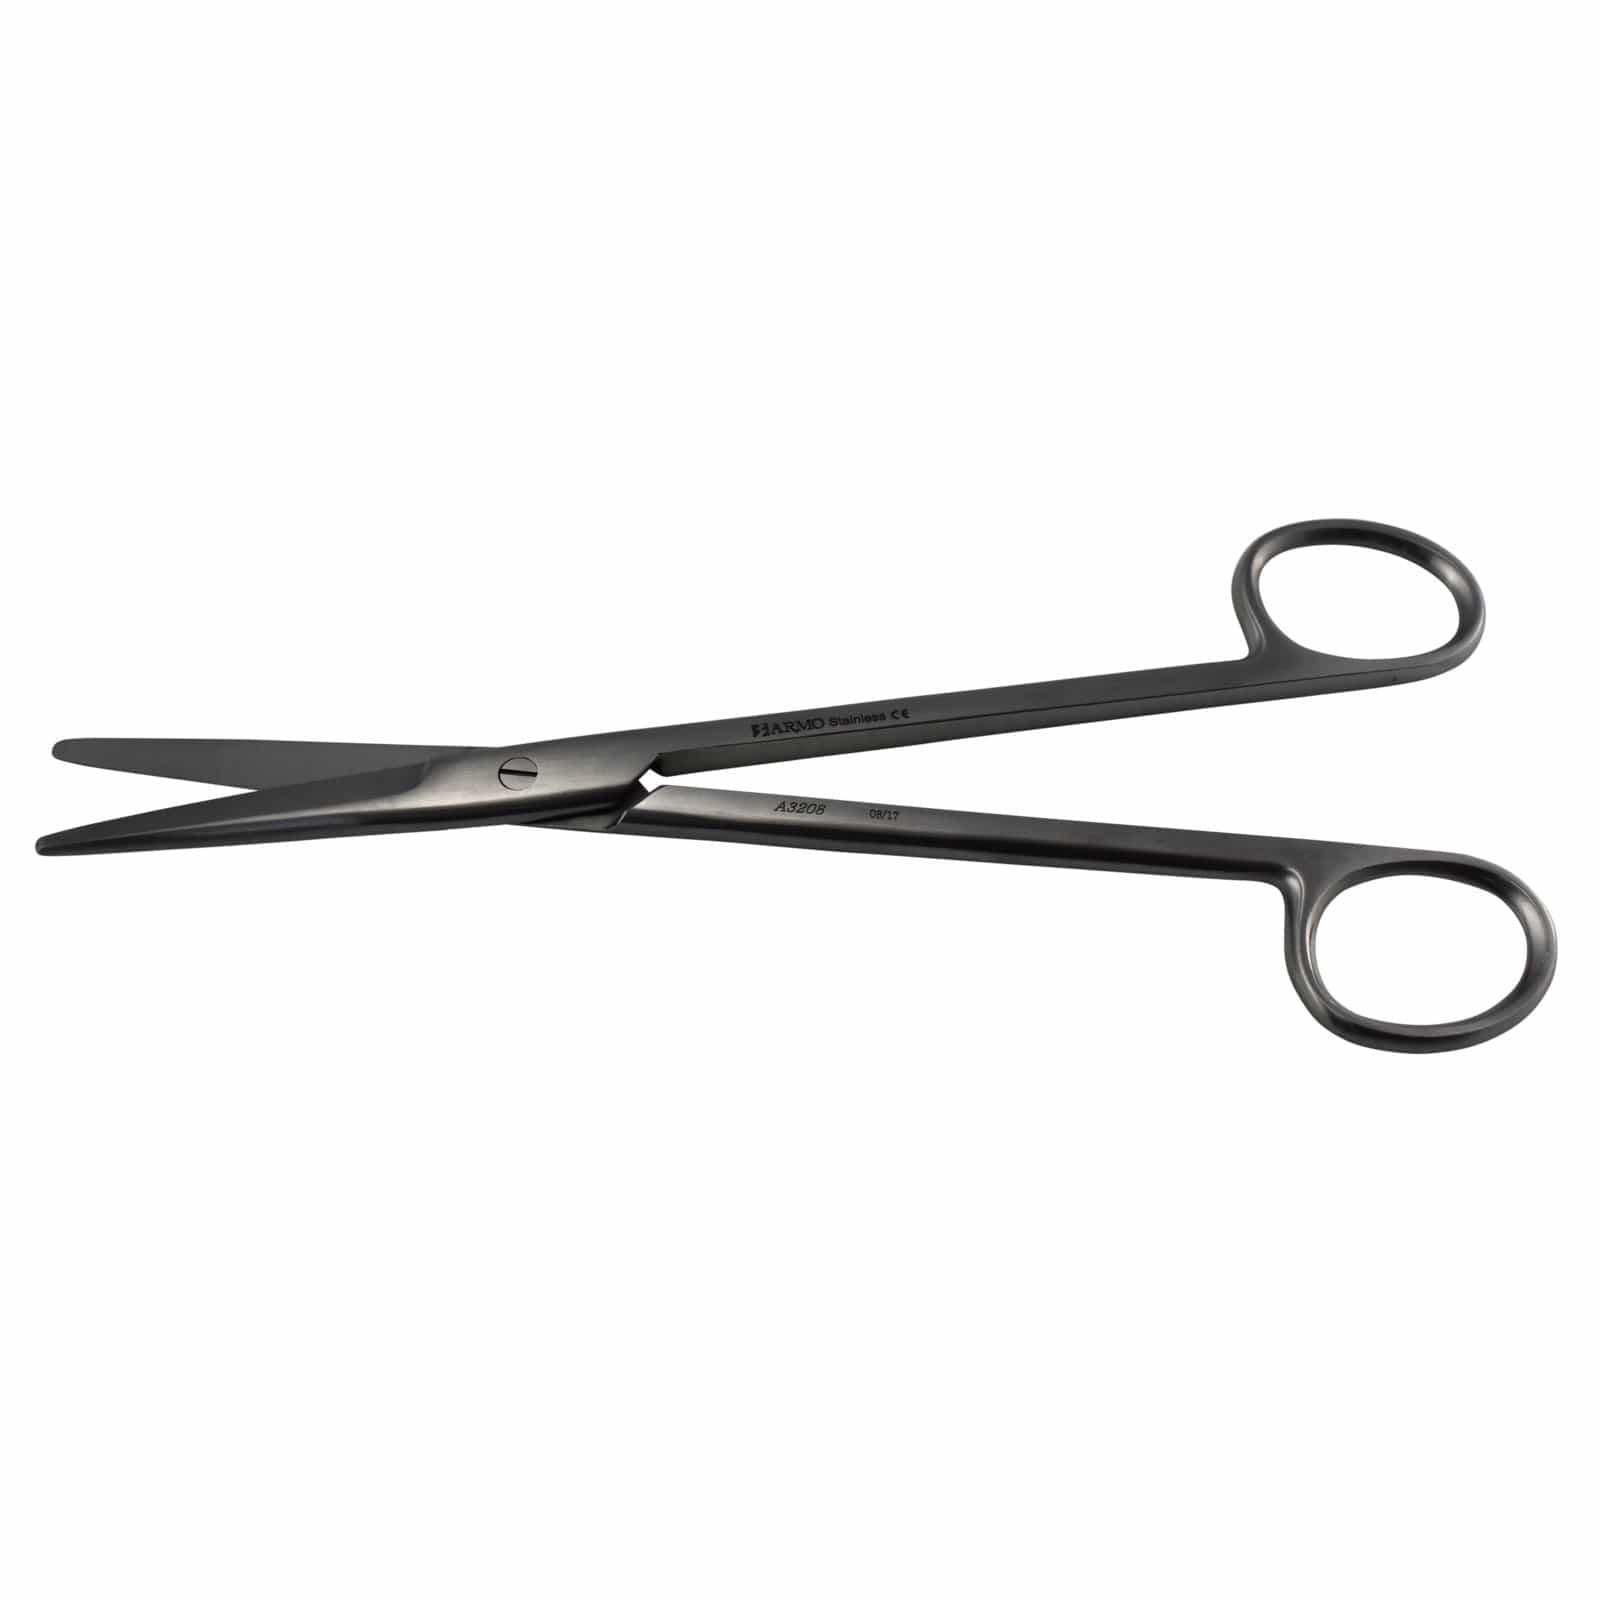 Armo Surgical Instruments 20cm / Straight / Standard Armo Mayo Scissors